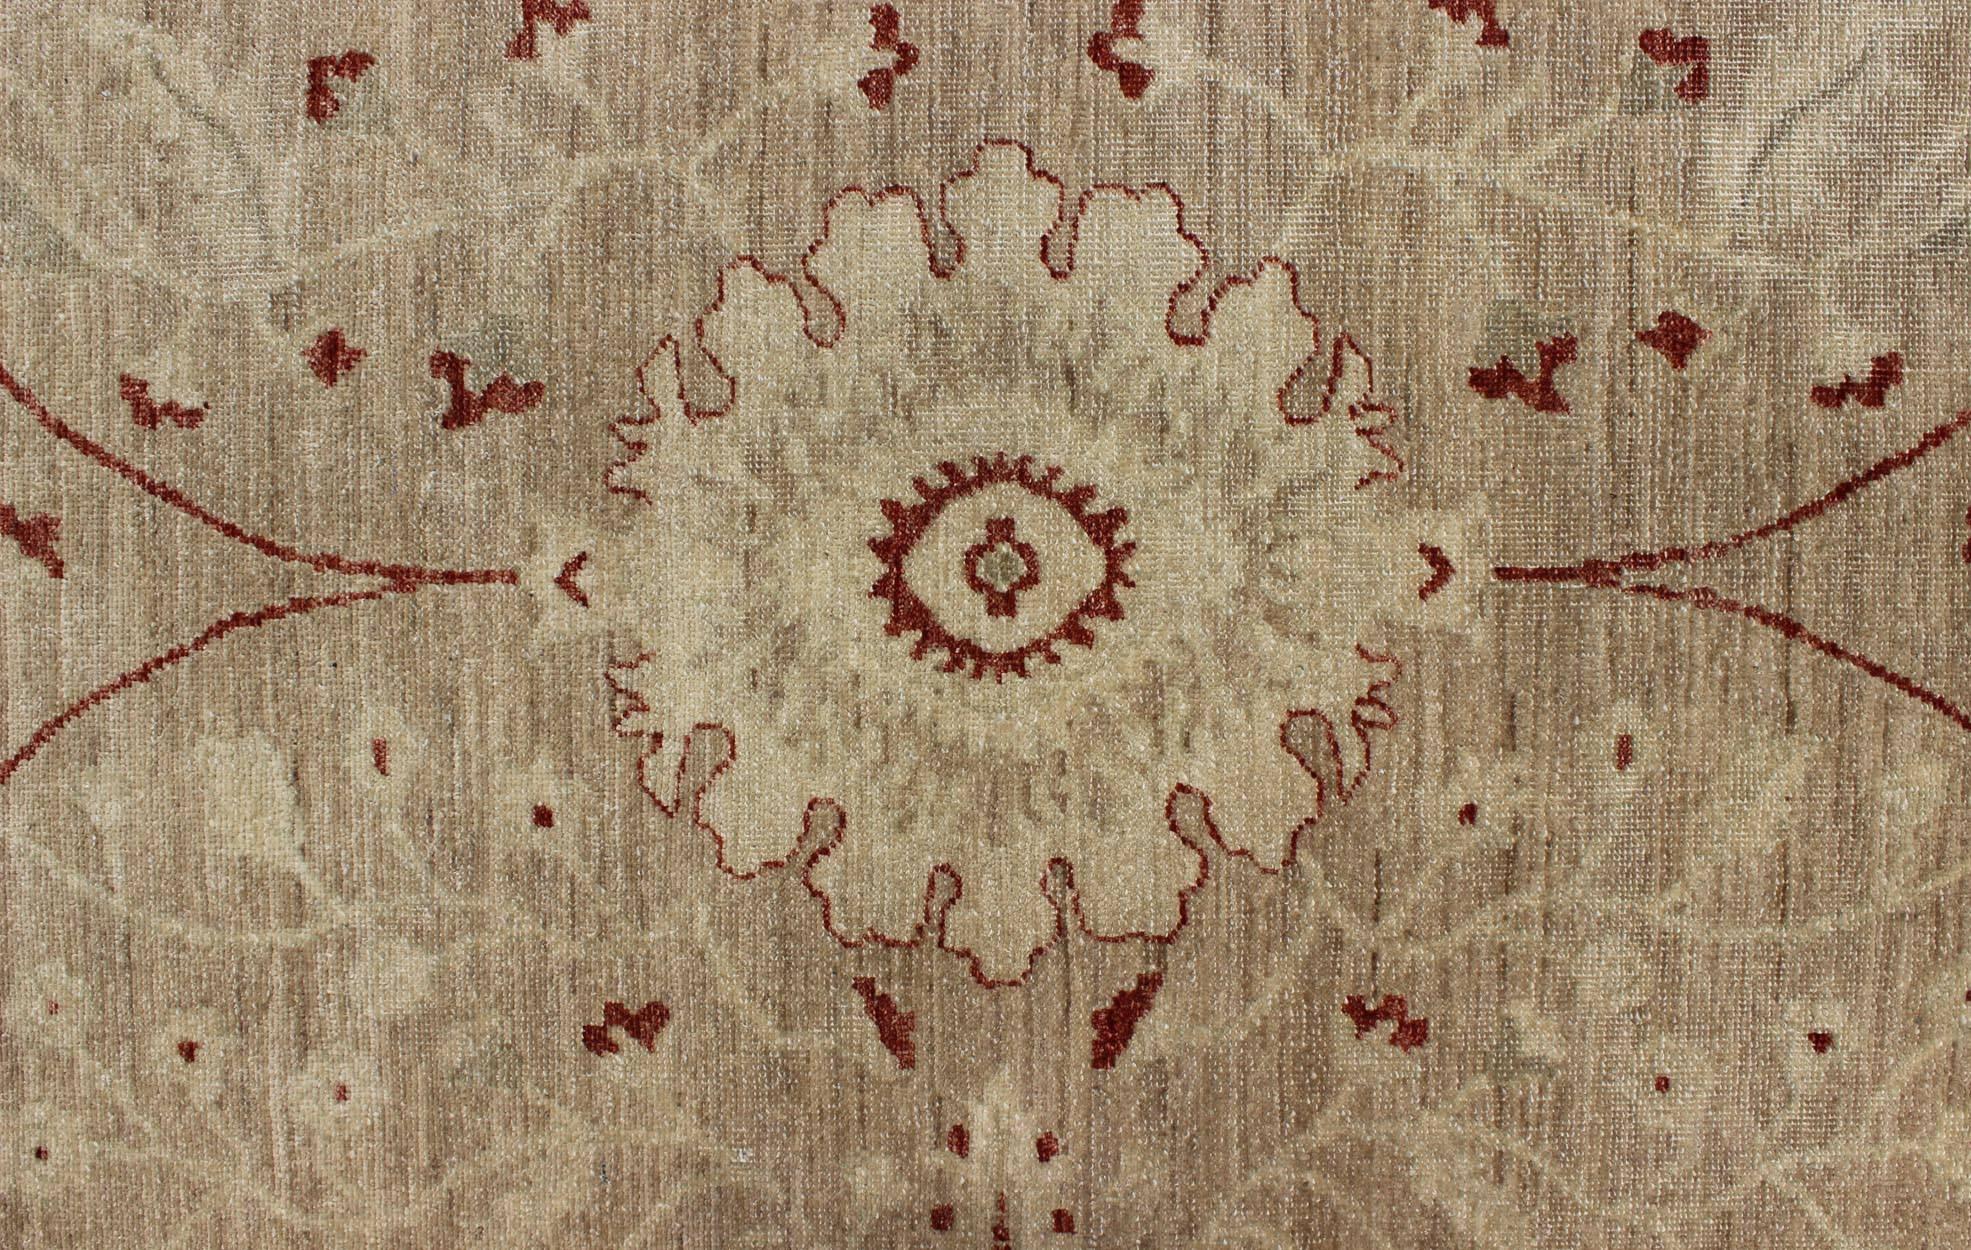 Contemporary Sultanabad Design Rug with Stylized Design in Light Camel, Cream & Garnet Red For Sale